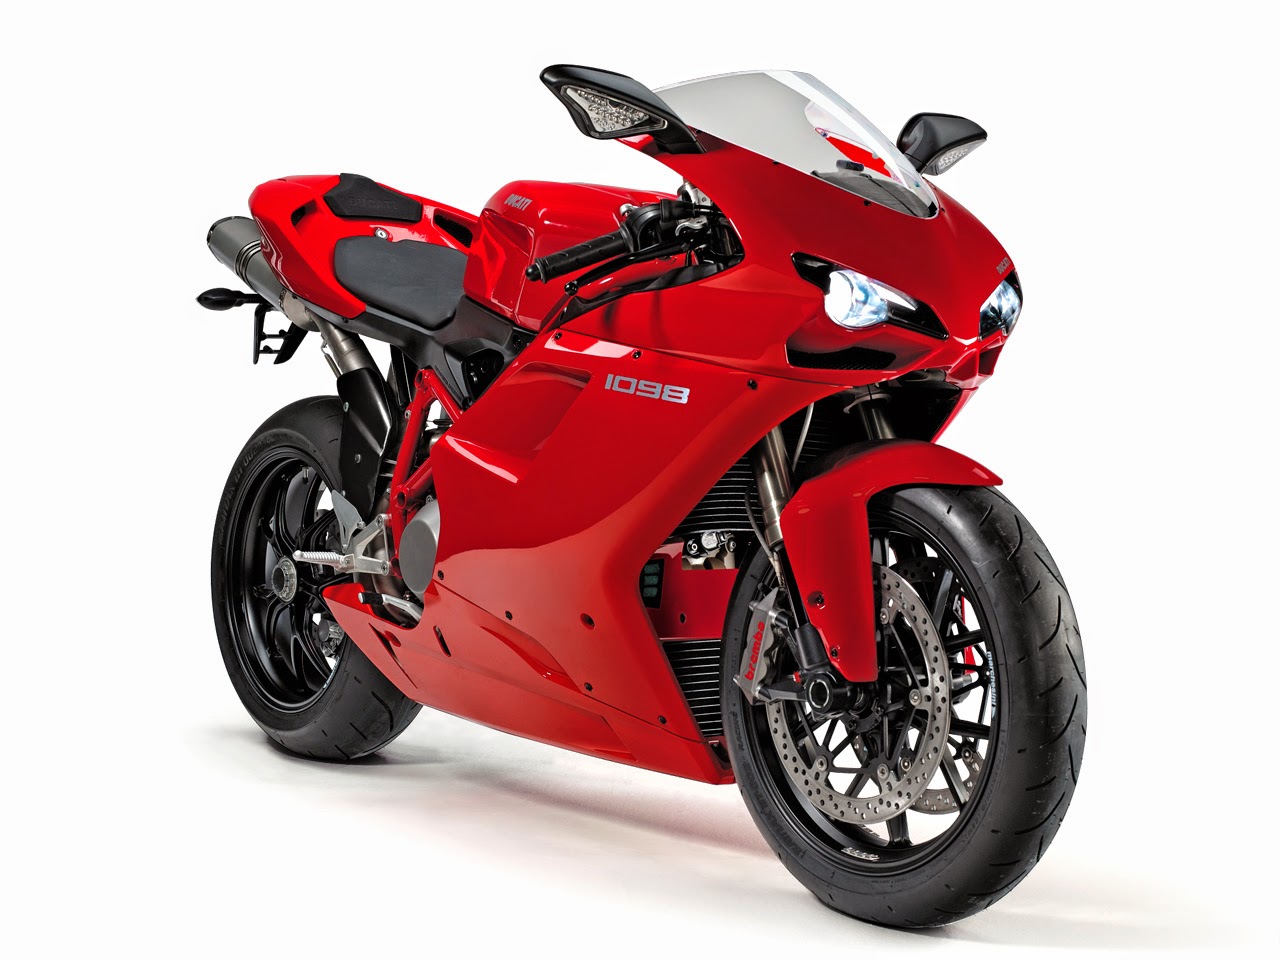 Top 10 Fastest Motor Bikes in the World